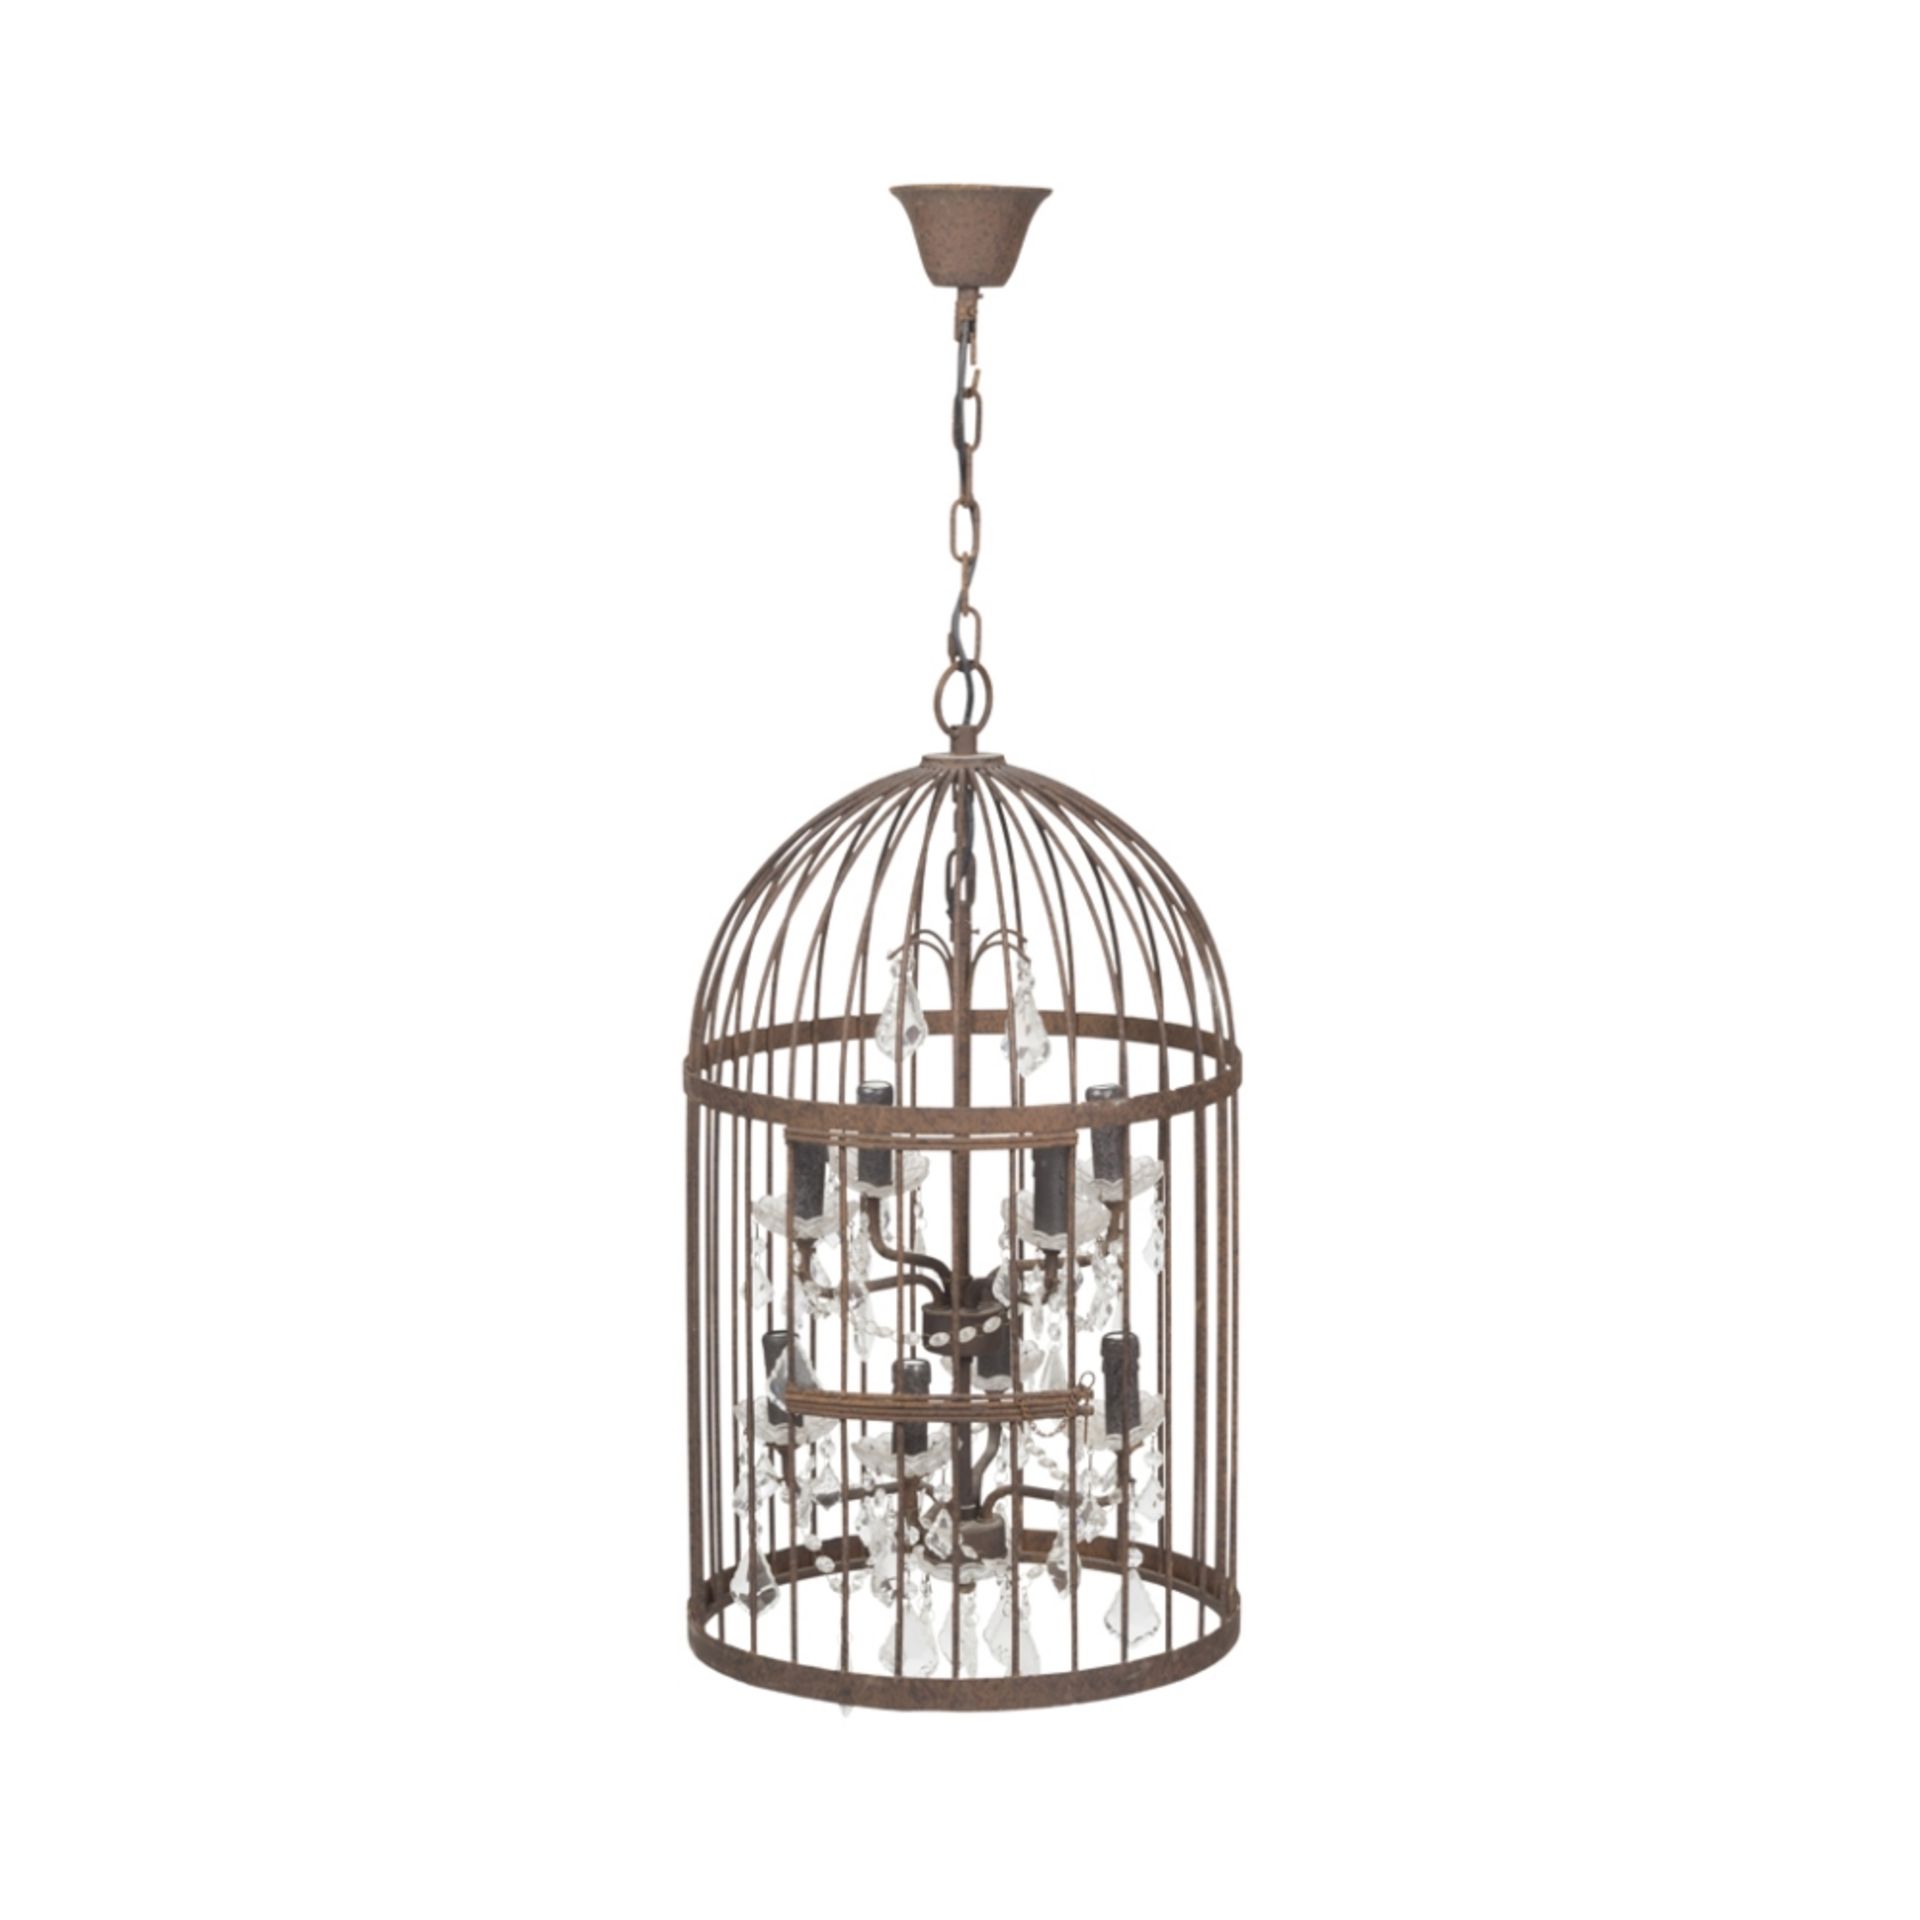 BRASS AND GLASS BIRDCAGE CEILING LIGHT20TH CENTURY, MADE UP of typical domed form, enclosing four